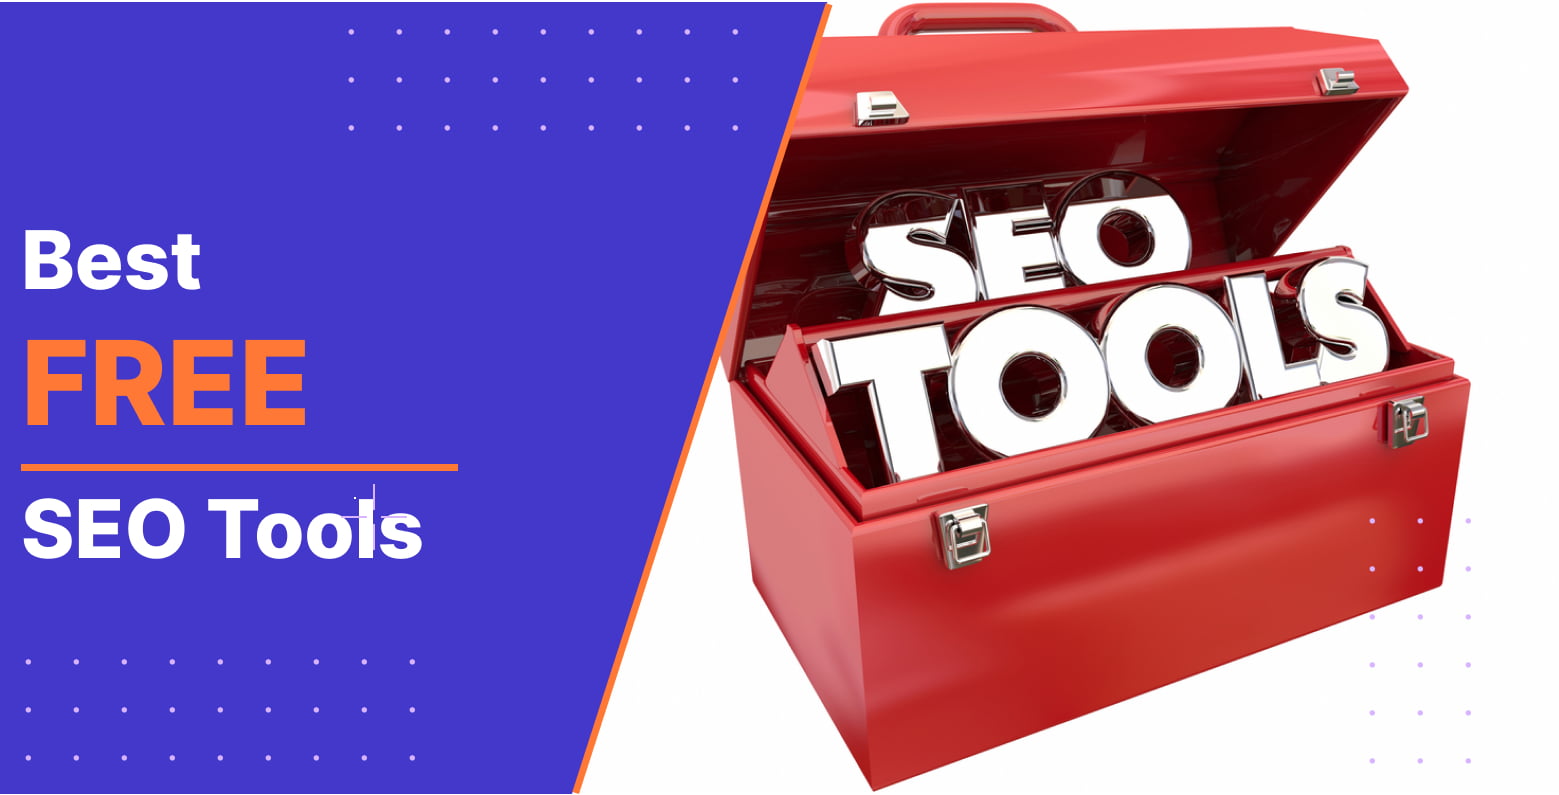 The best free seo tools